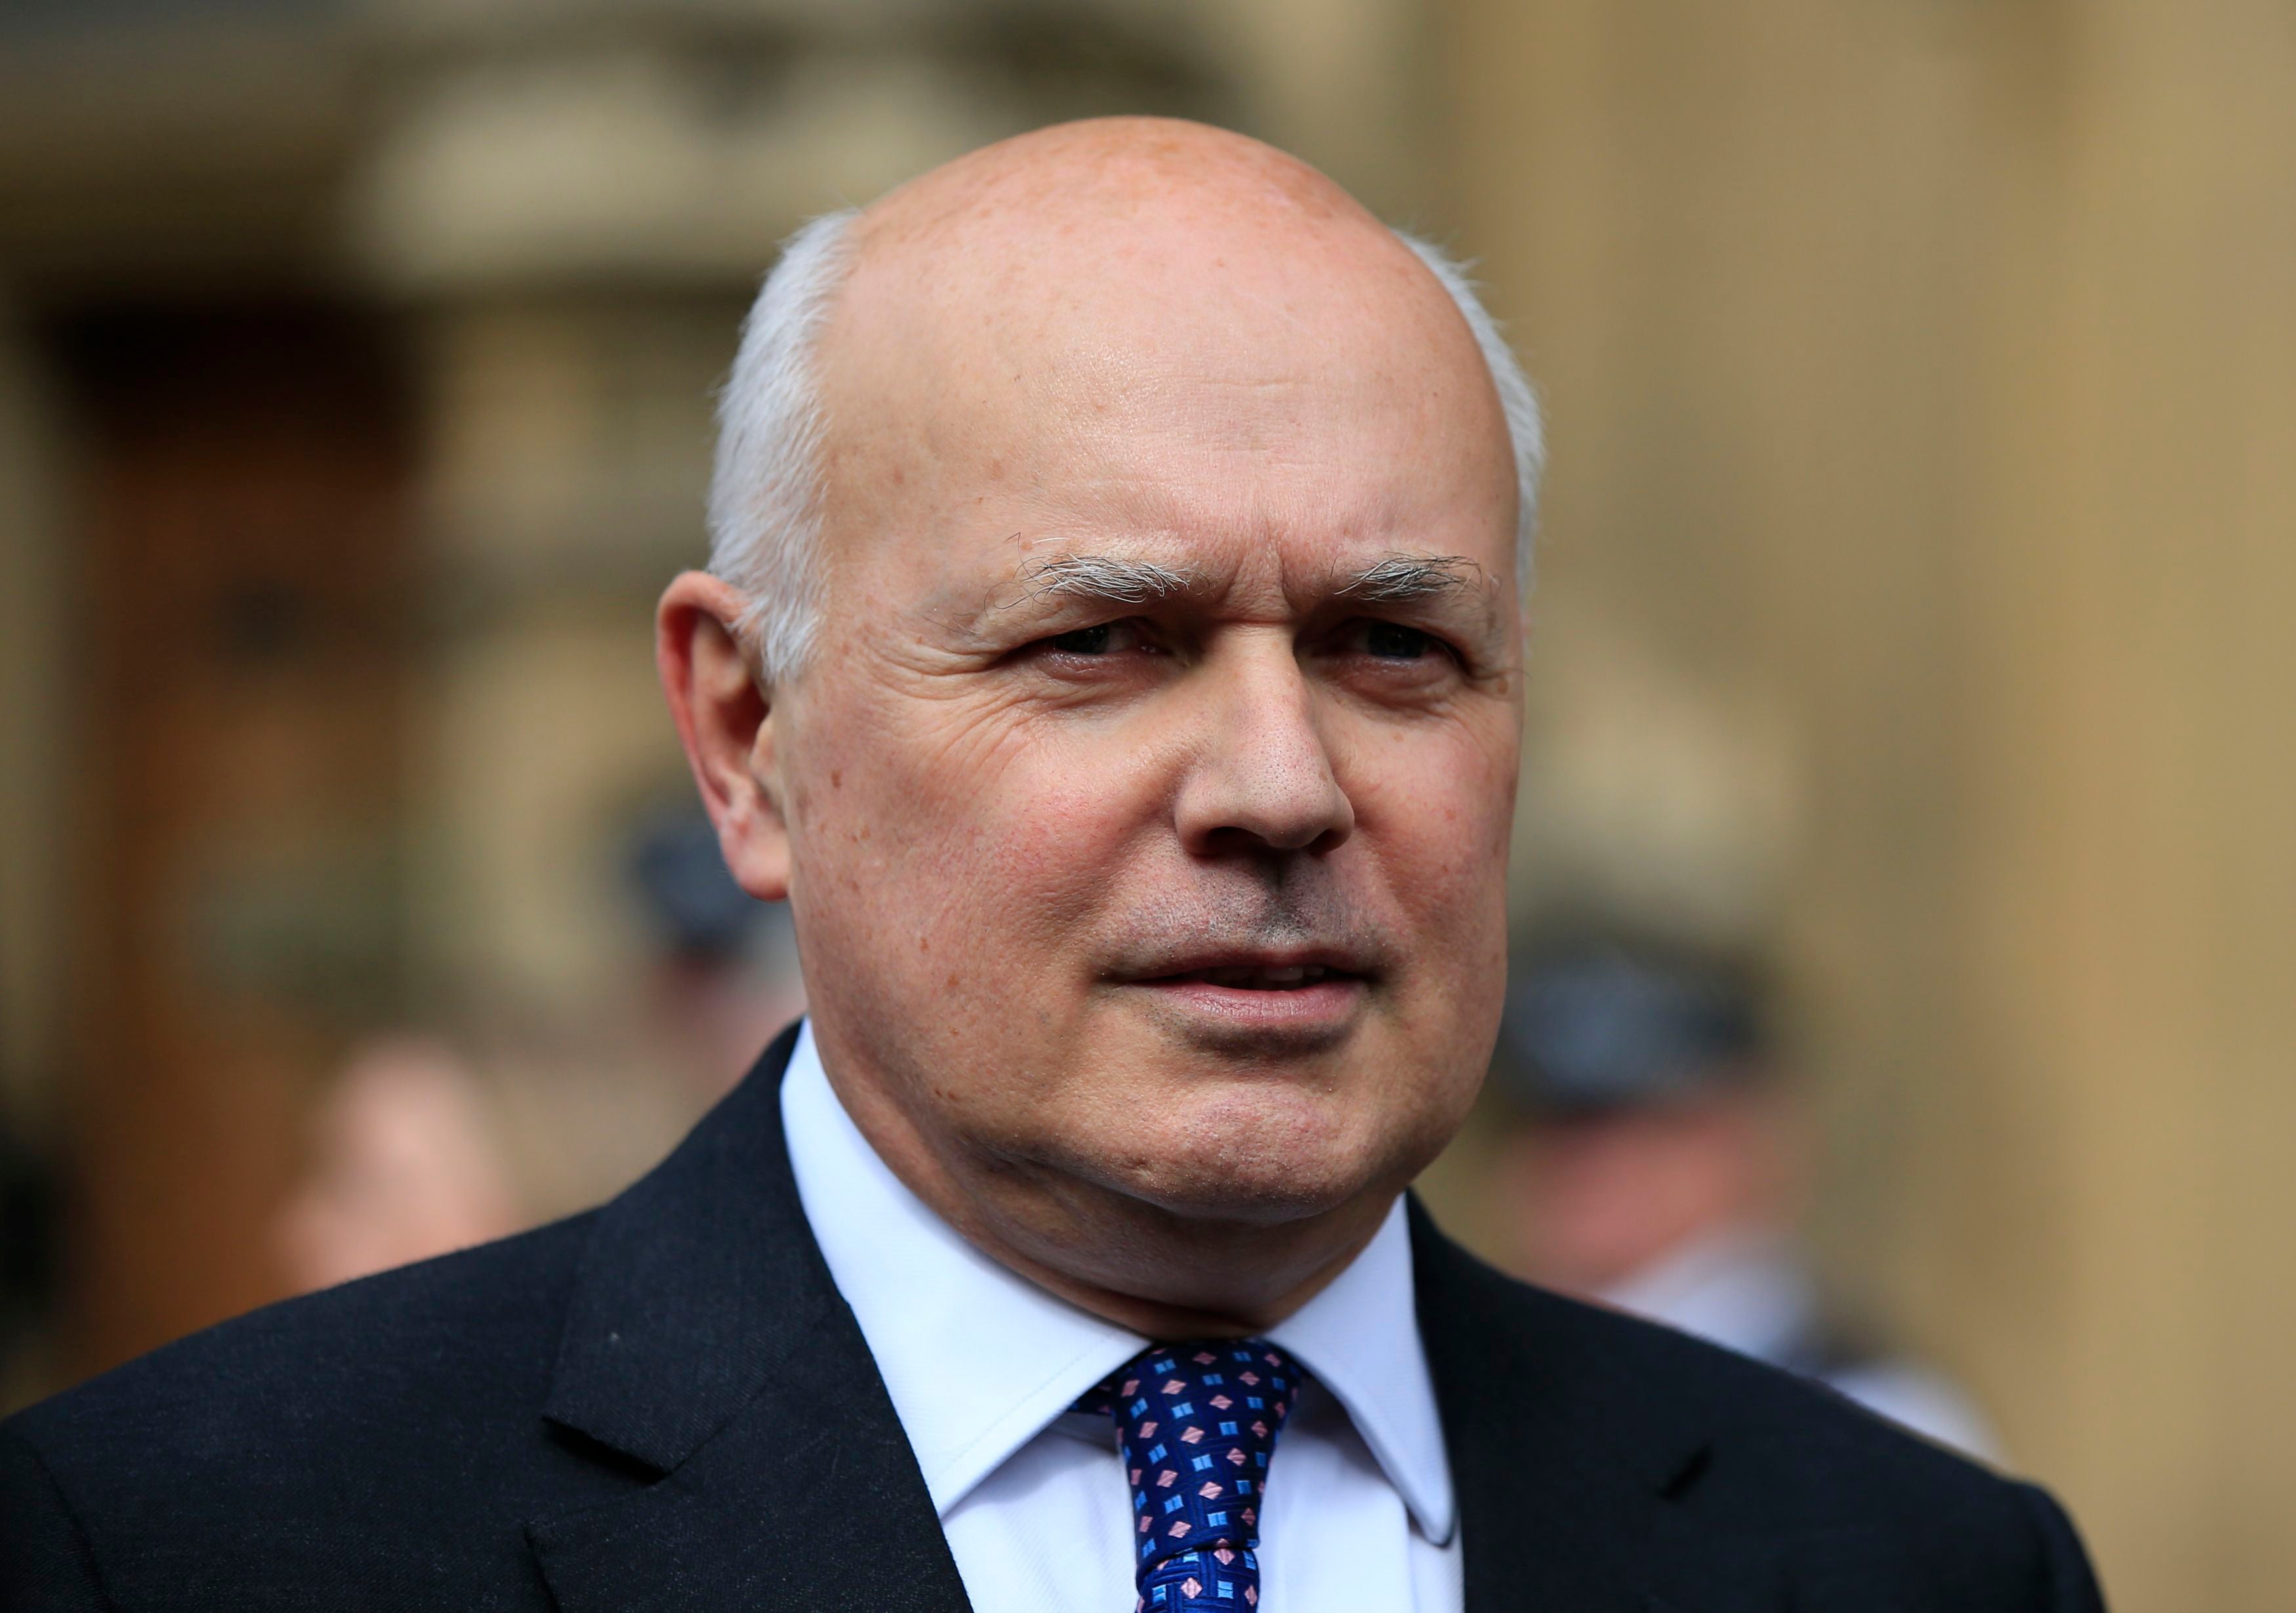 Iain Duncan Smith is among the MPs and peers to have penned a letter expressing concern about the decision to extend an invitation to the Chinese Government (Jonathan Brady/PA)